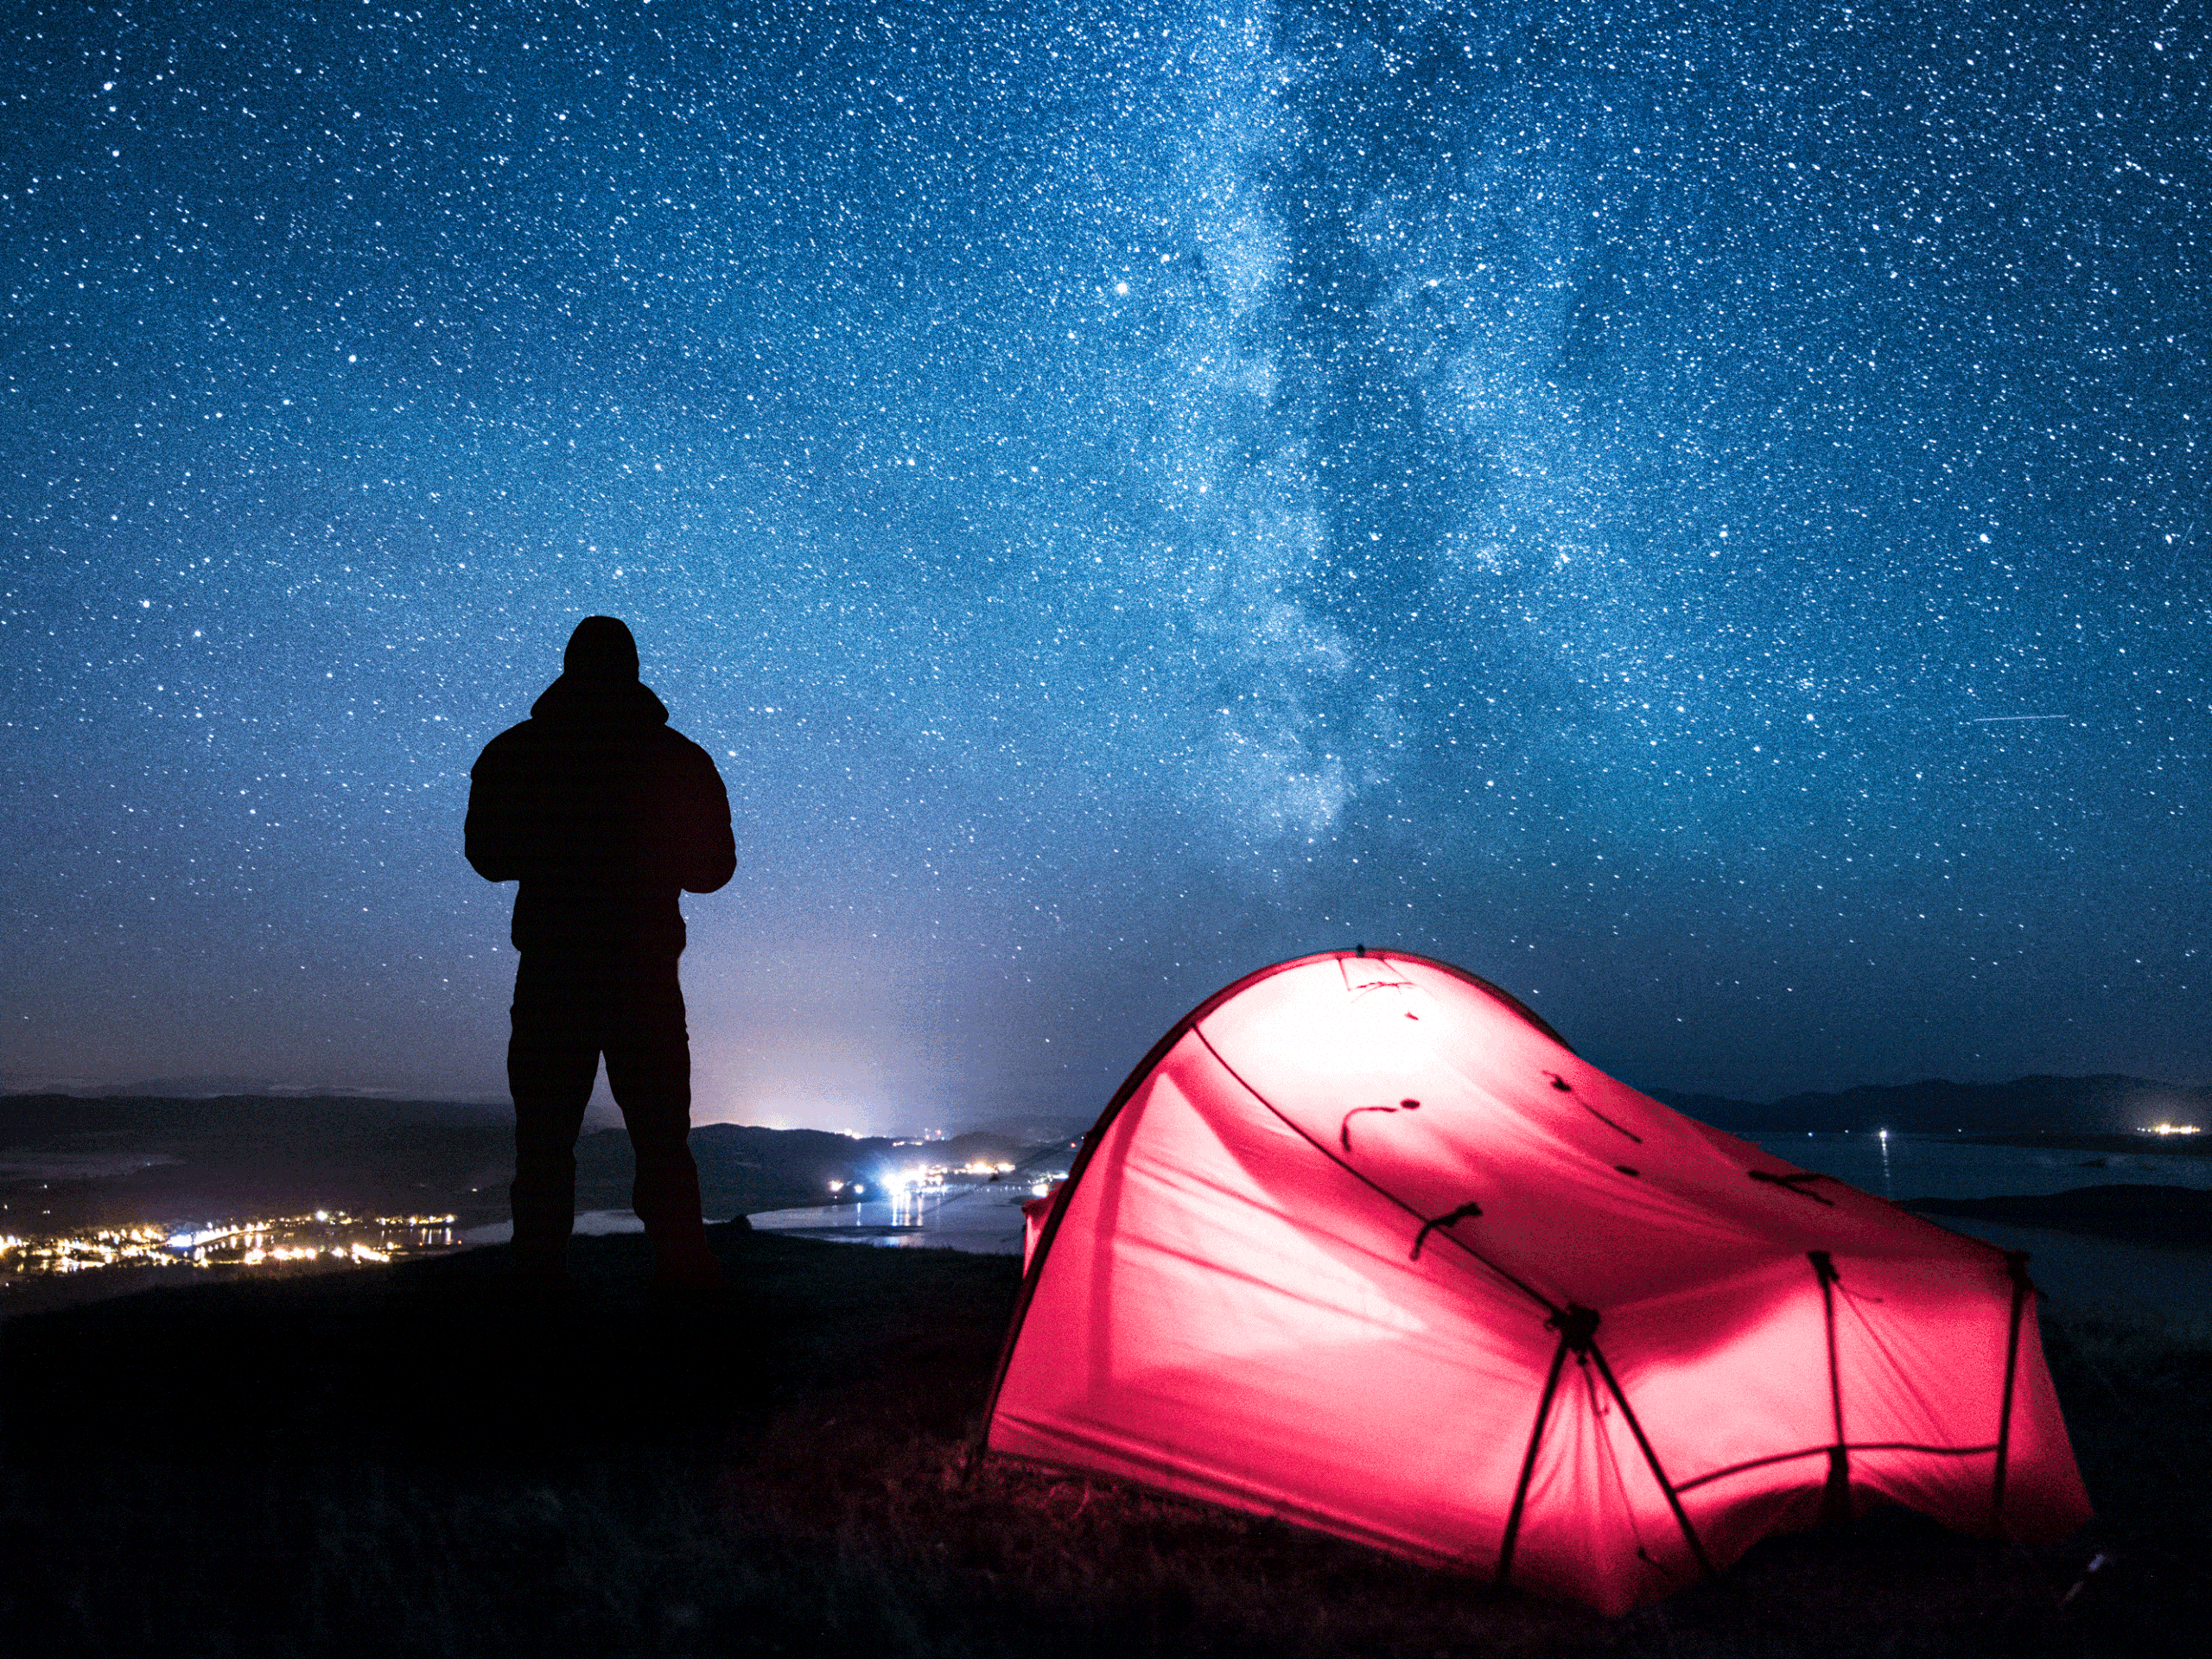 Sleeping under the stars can help re-set your body clock, study shows